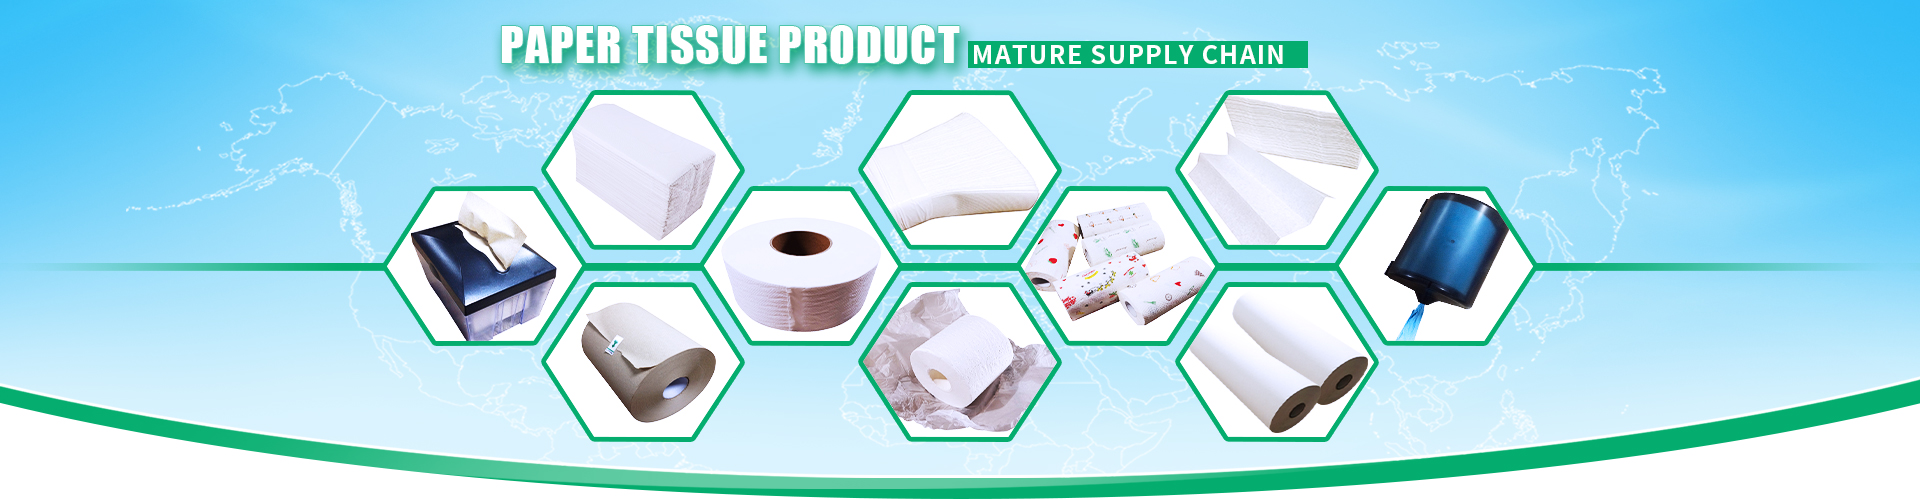 Compact Paper Hand Towel TAD - Chaozhou Soft Paper Products Co.,Ltd